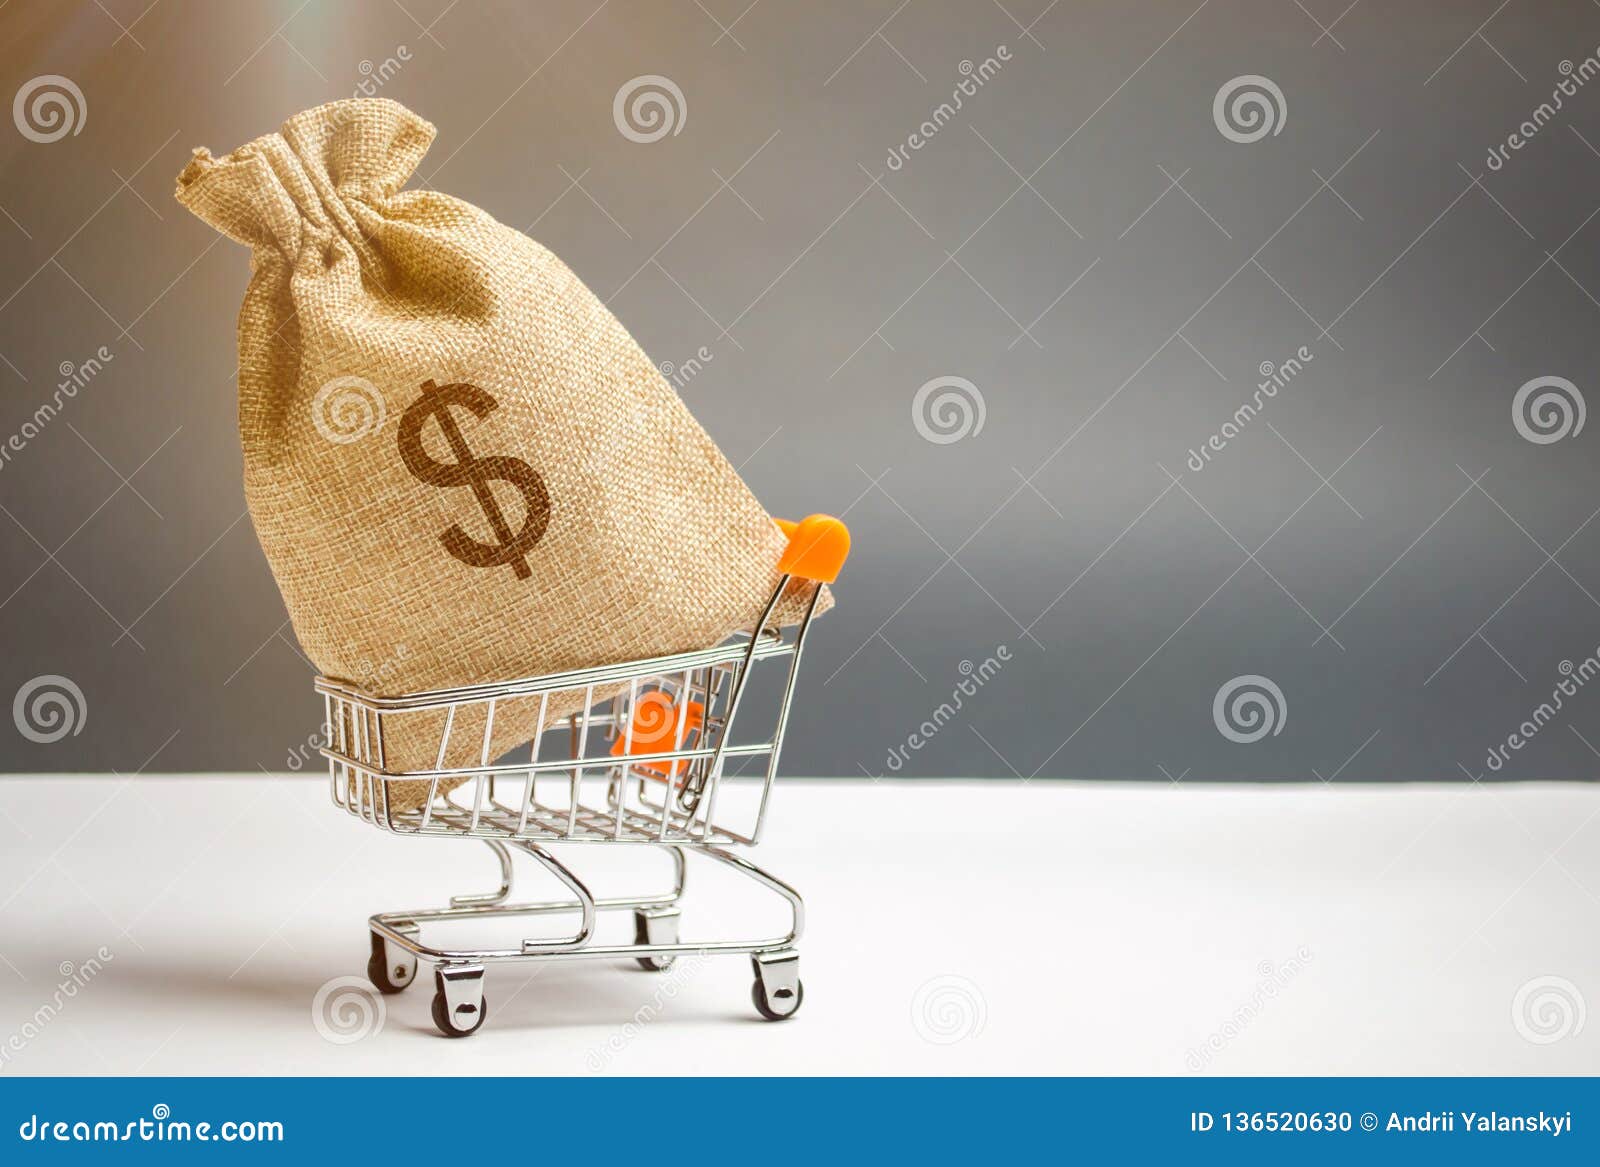 money bag in supermarket trolley and dollar sign. money management. money market. sale, discounts and low prices. gift certificate